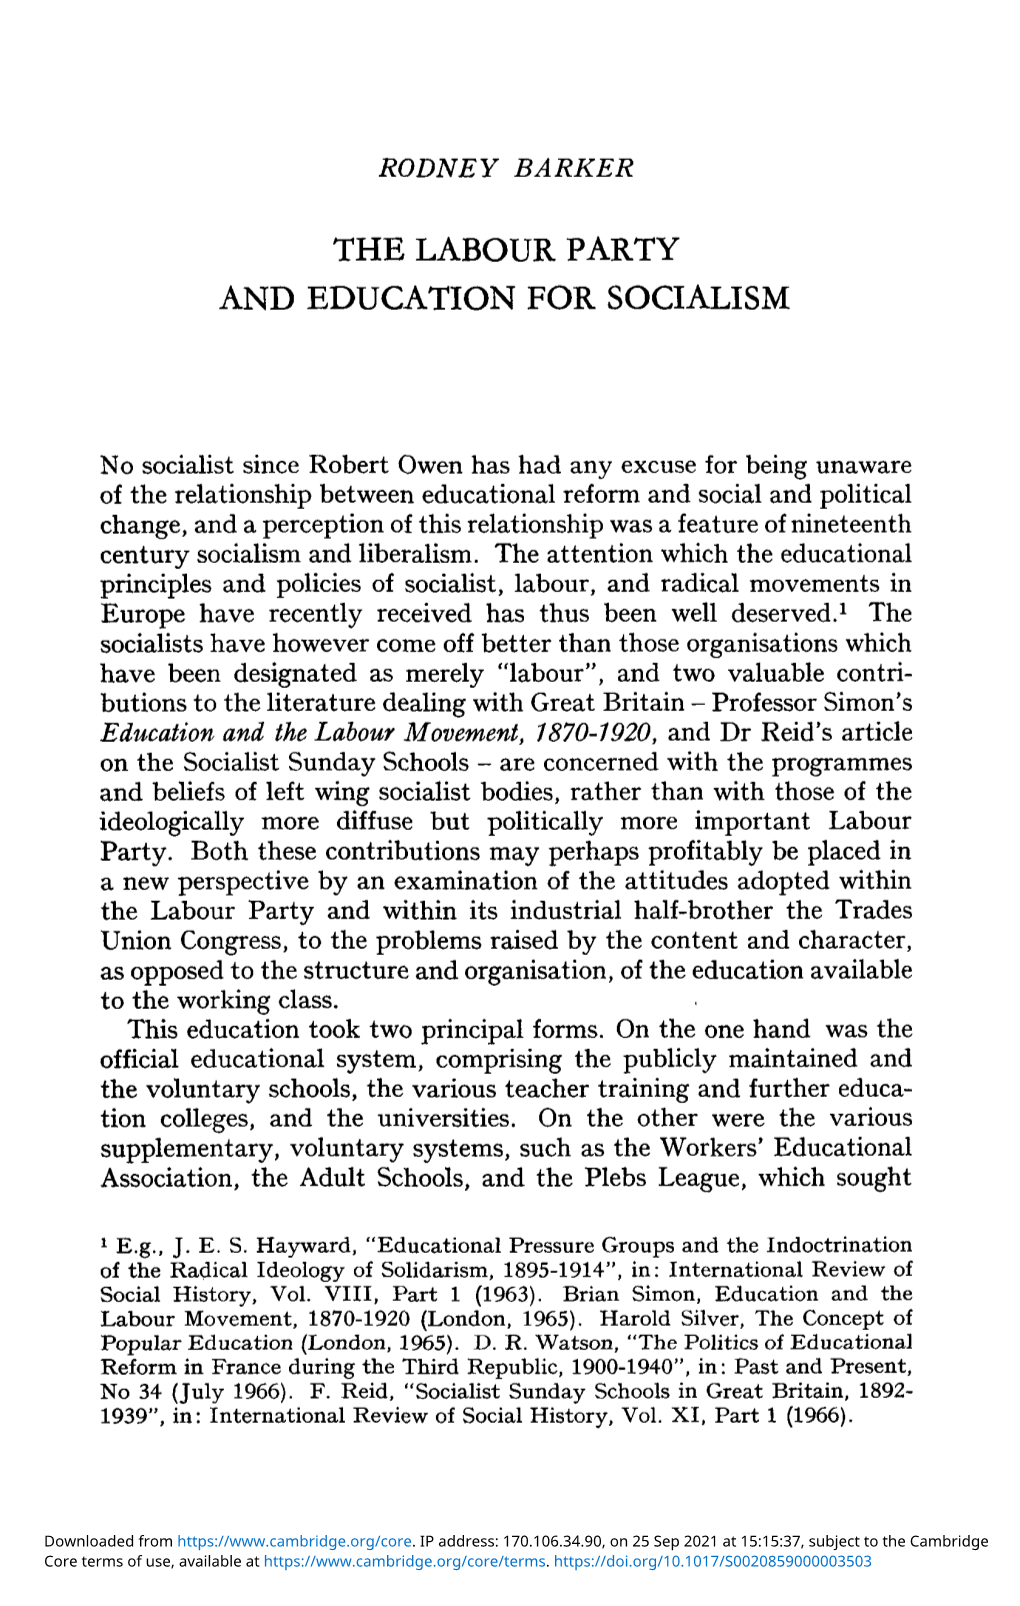 The Labour Party and Education for Socialism